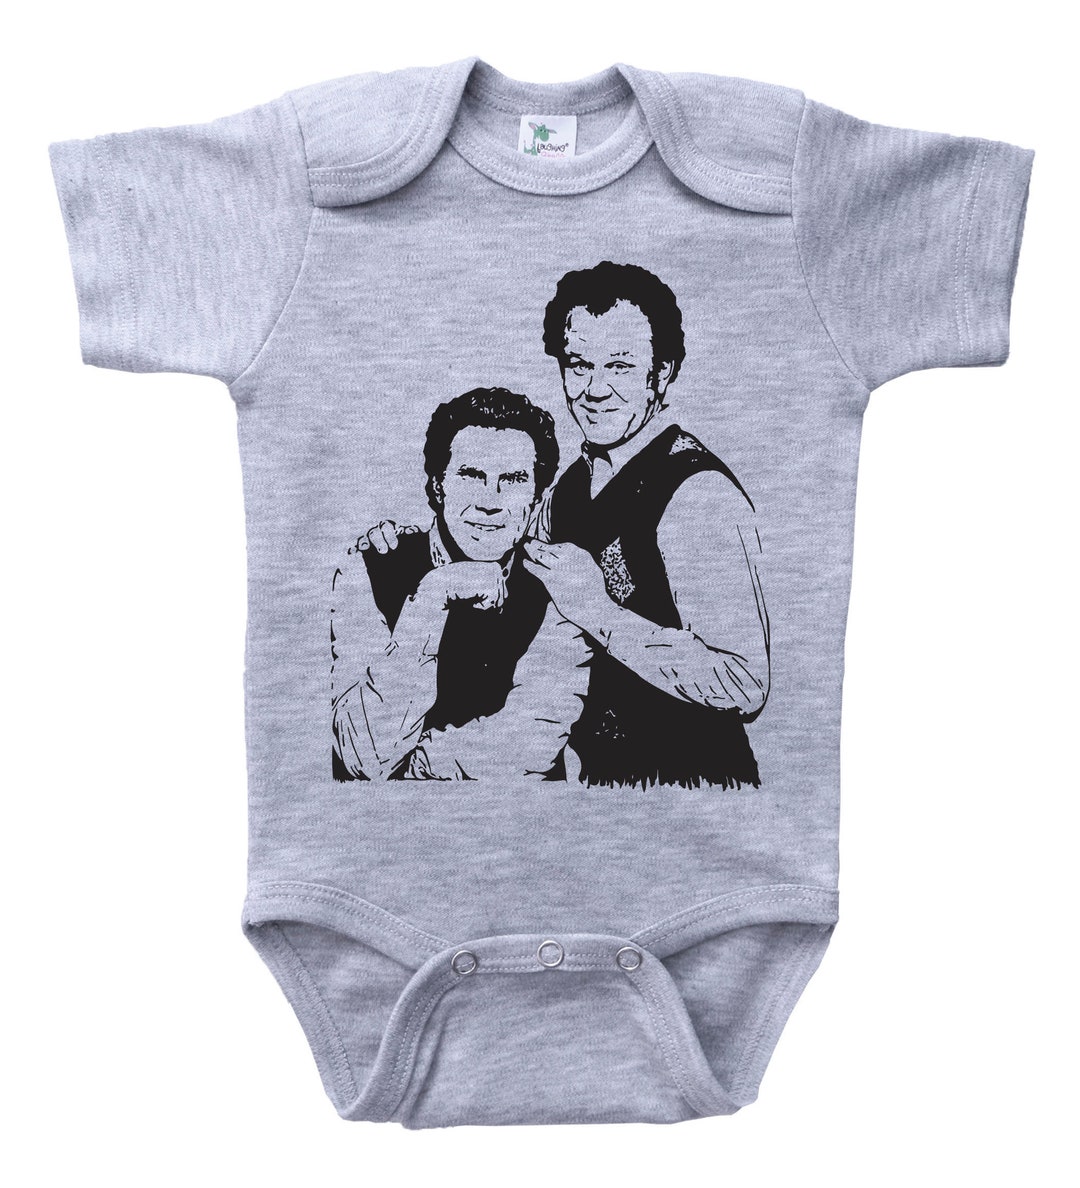 Funny Onesie®, STEP BROTHERS, Baby Outfit, Bodysuit, Baby Shower Gift ...